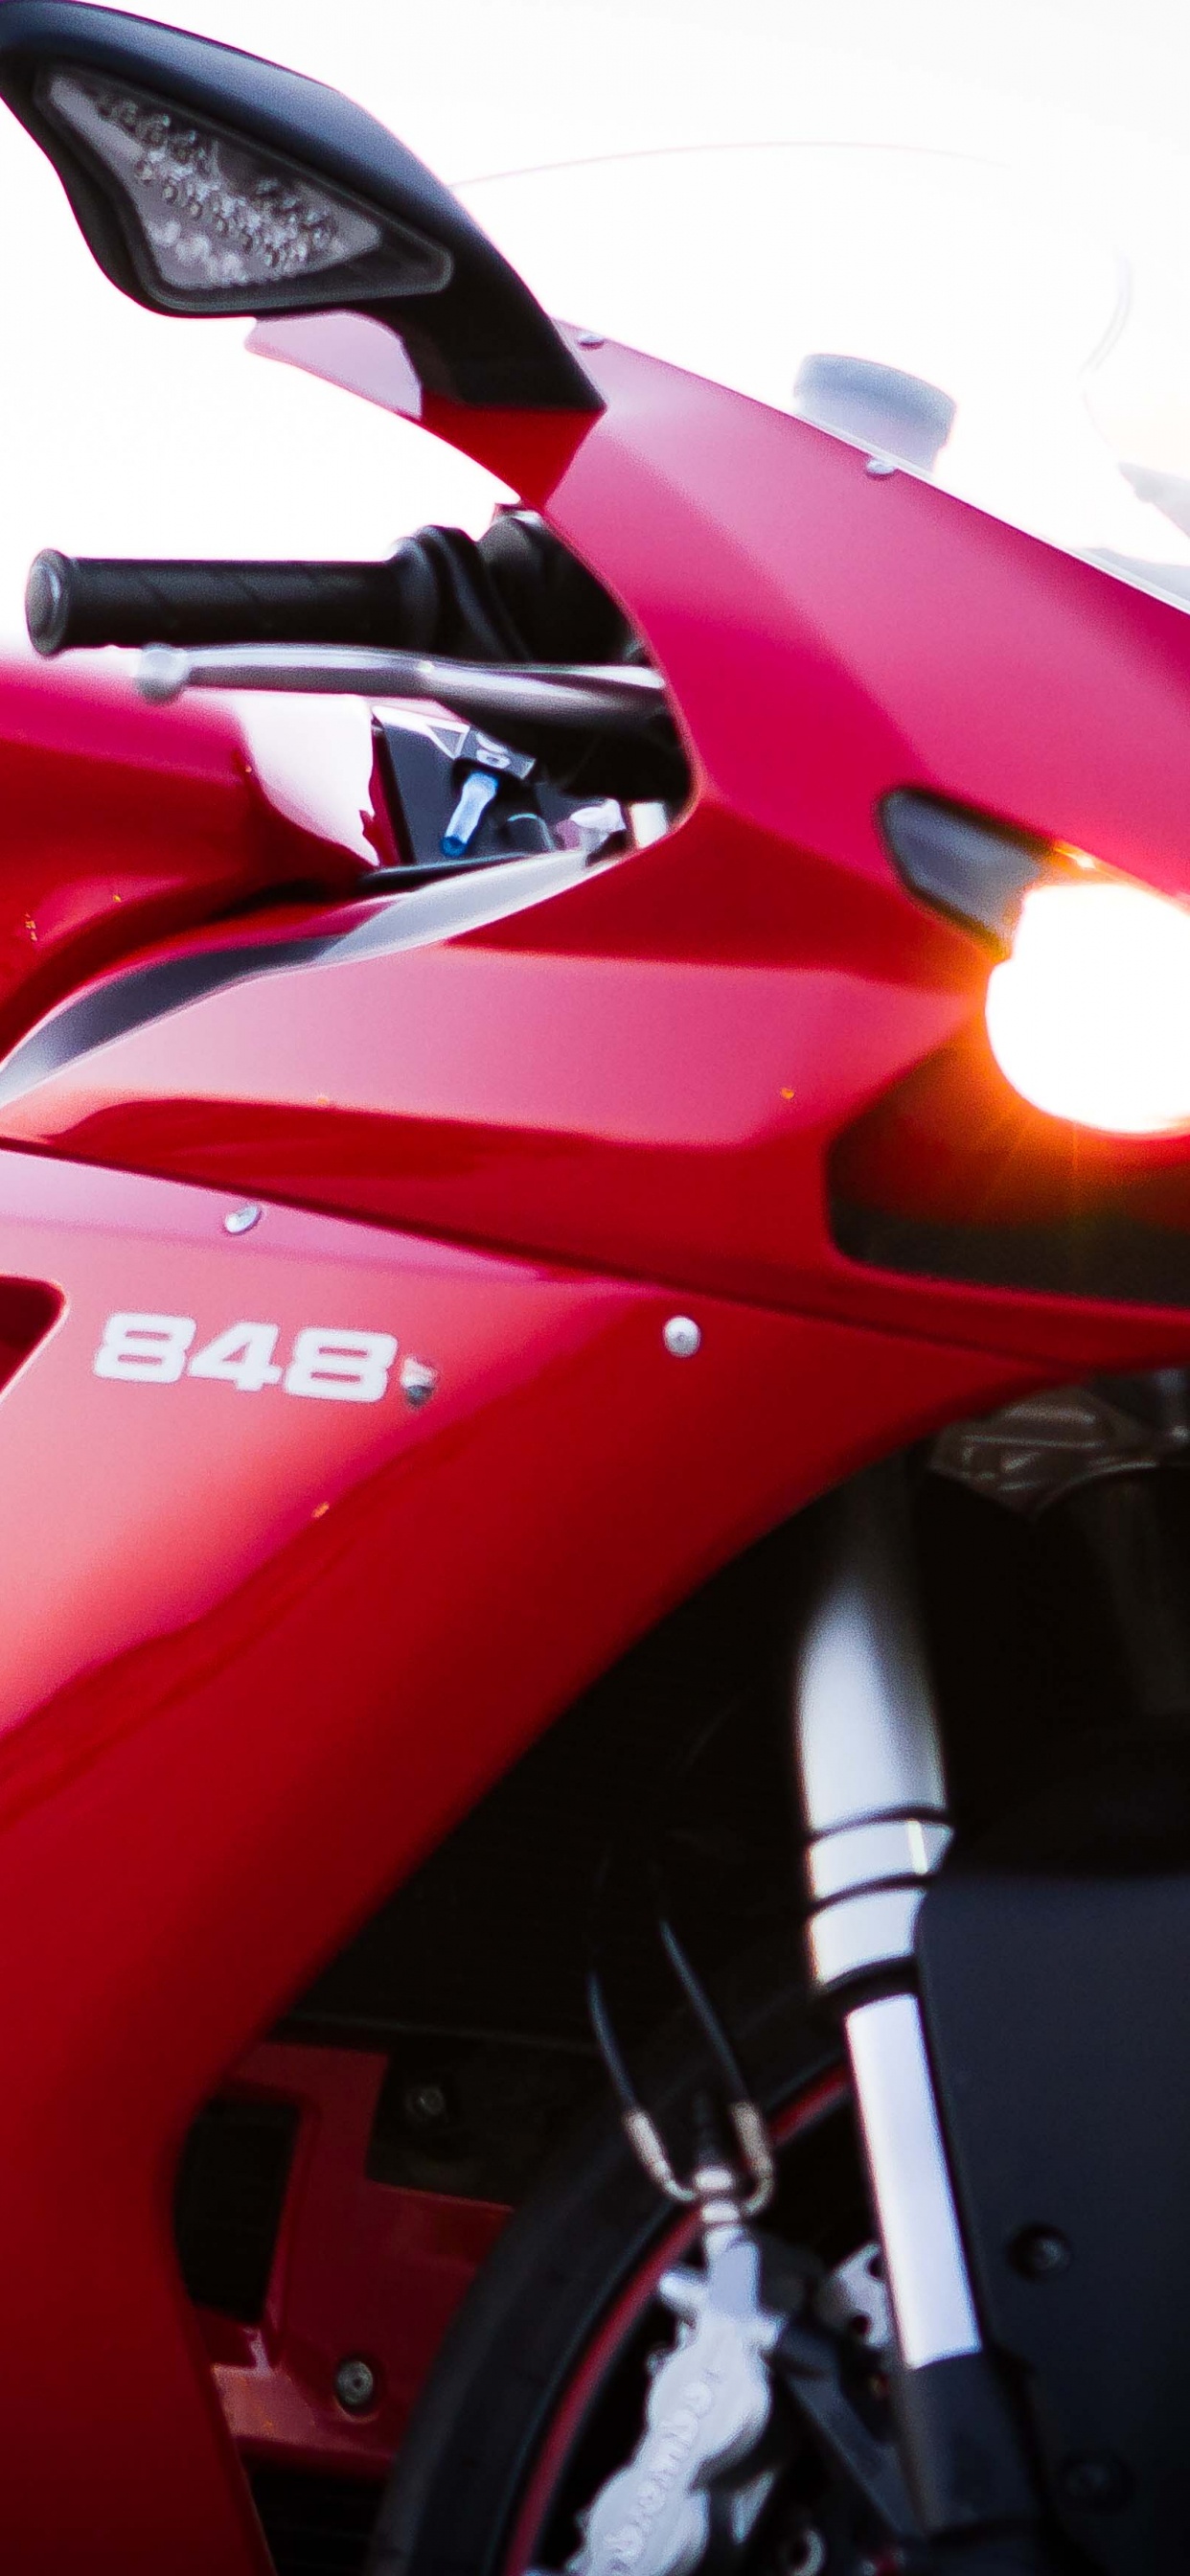 Red and Black Sports Bike. Wallpaper in 1242x2688 Resolution